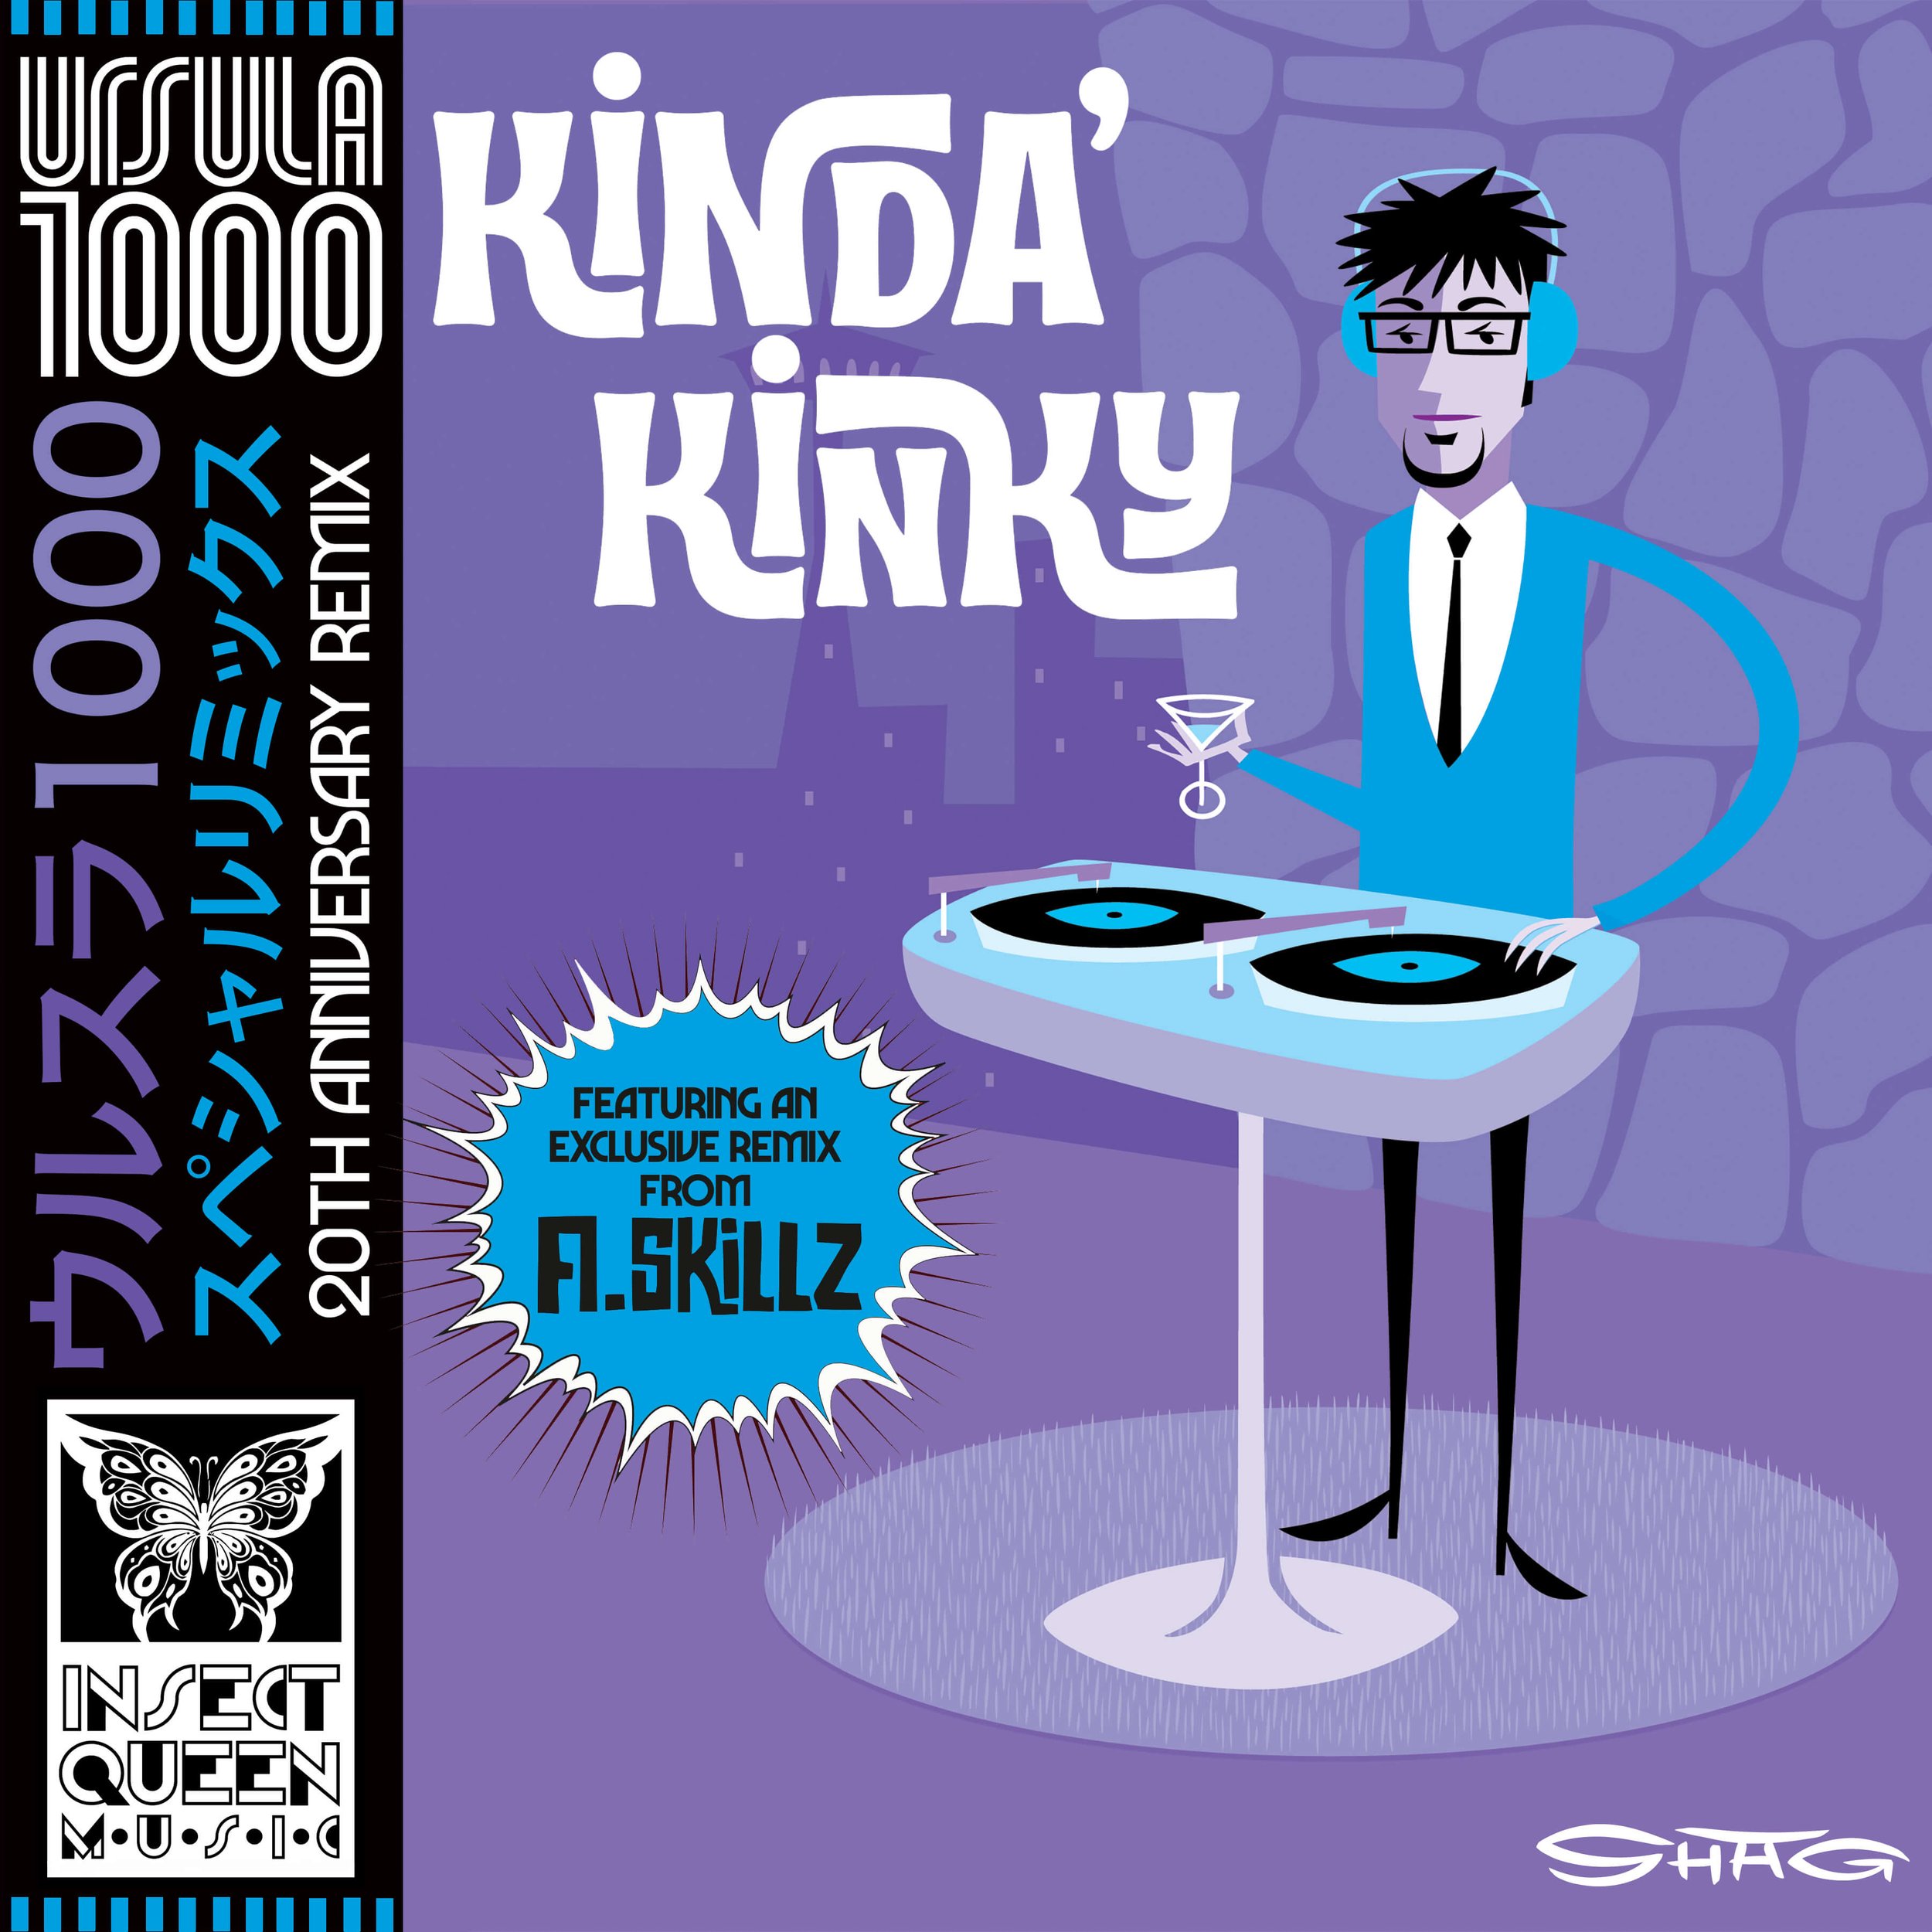 Ursula 1000 - Kinda' Kinky (20th Anniversary Remix) [Insect Queen Music]